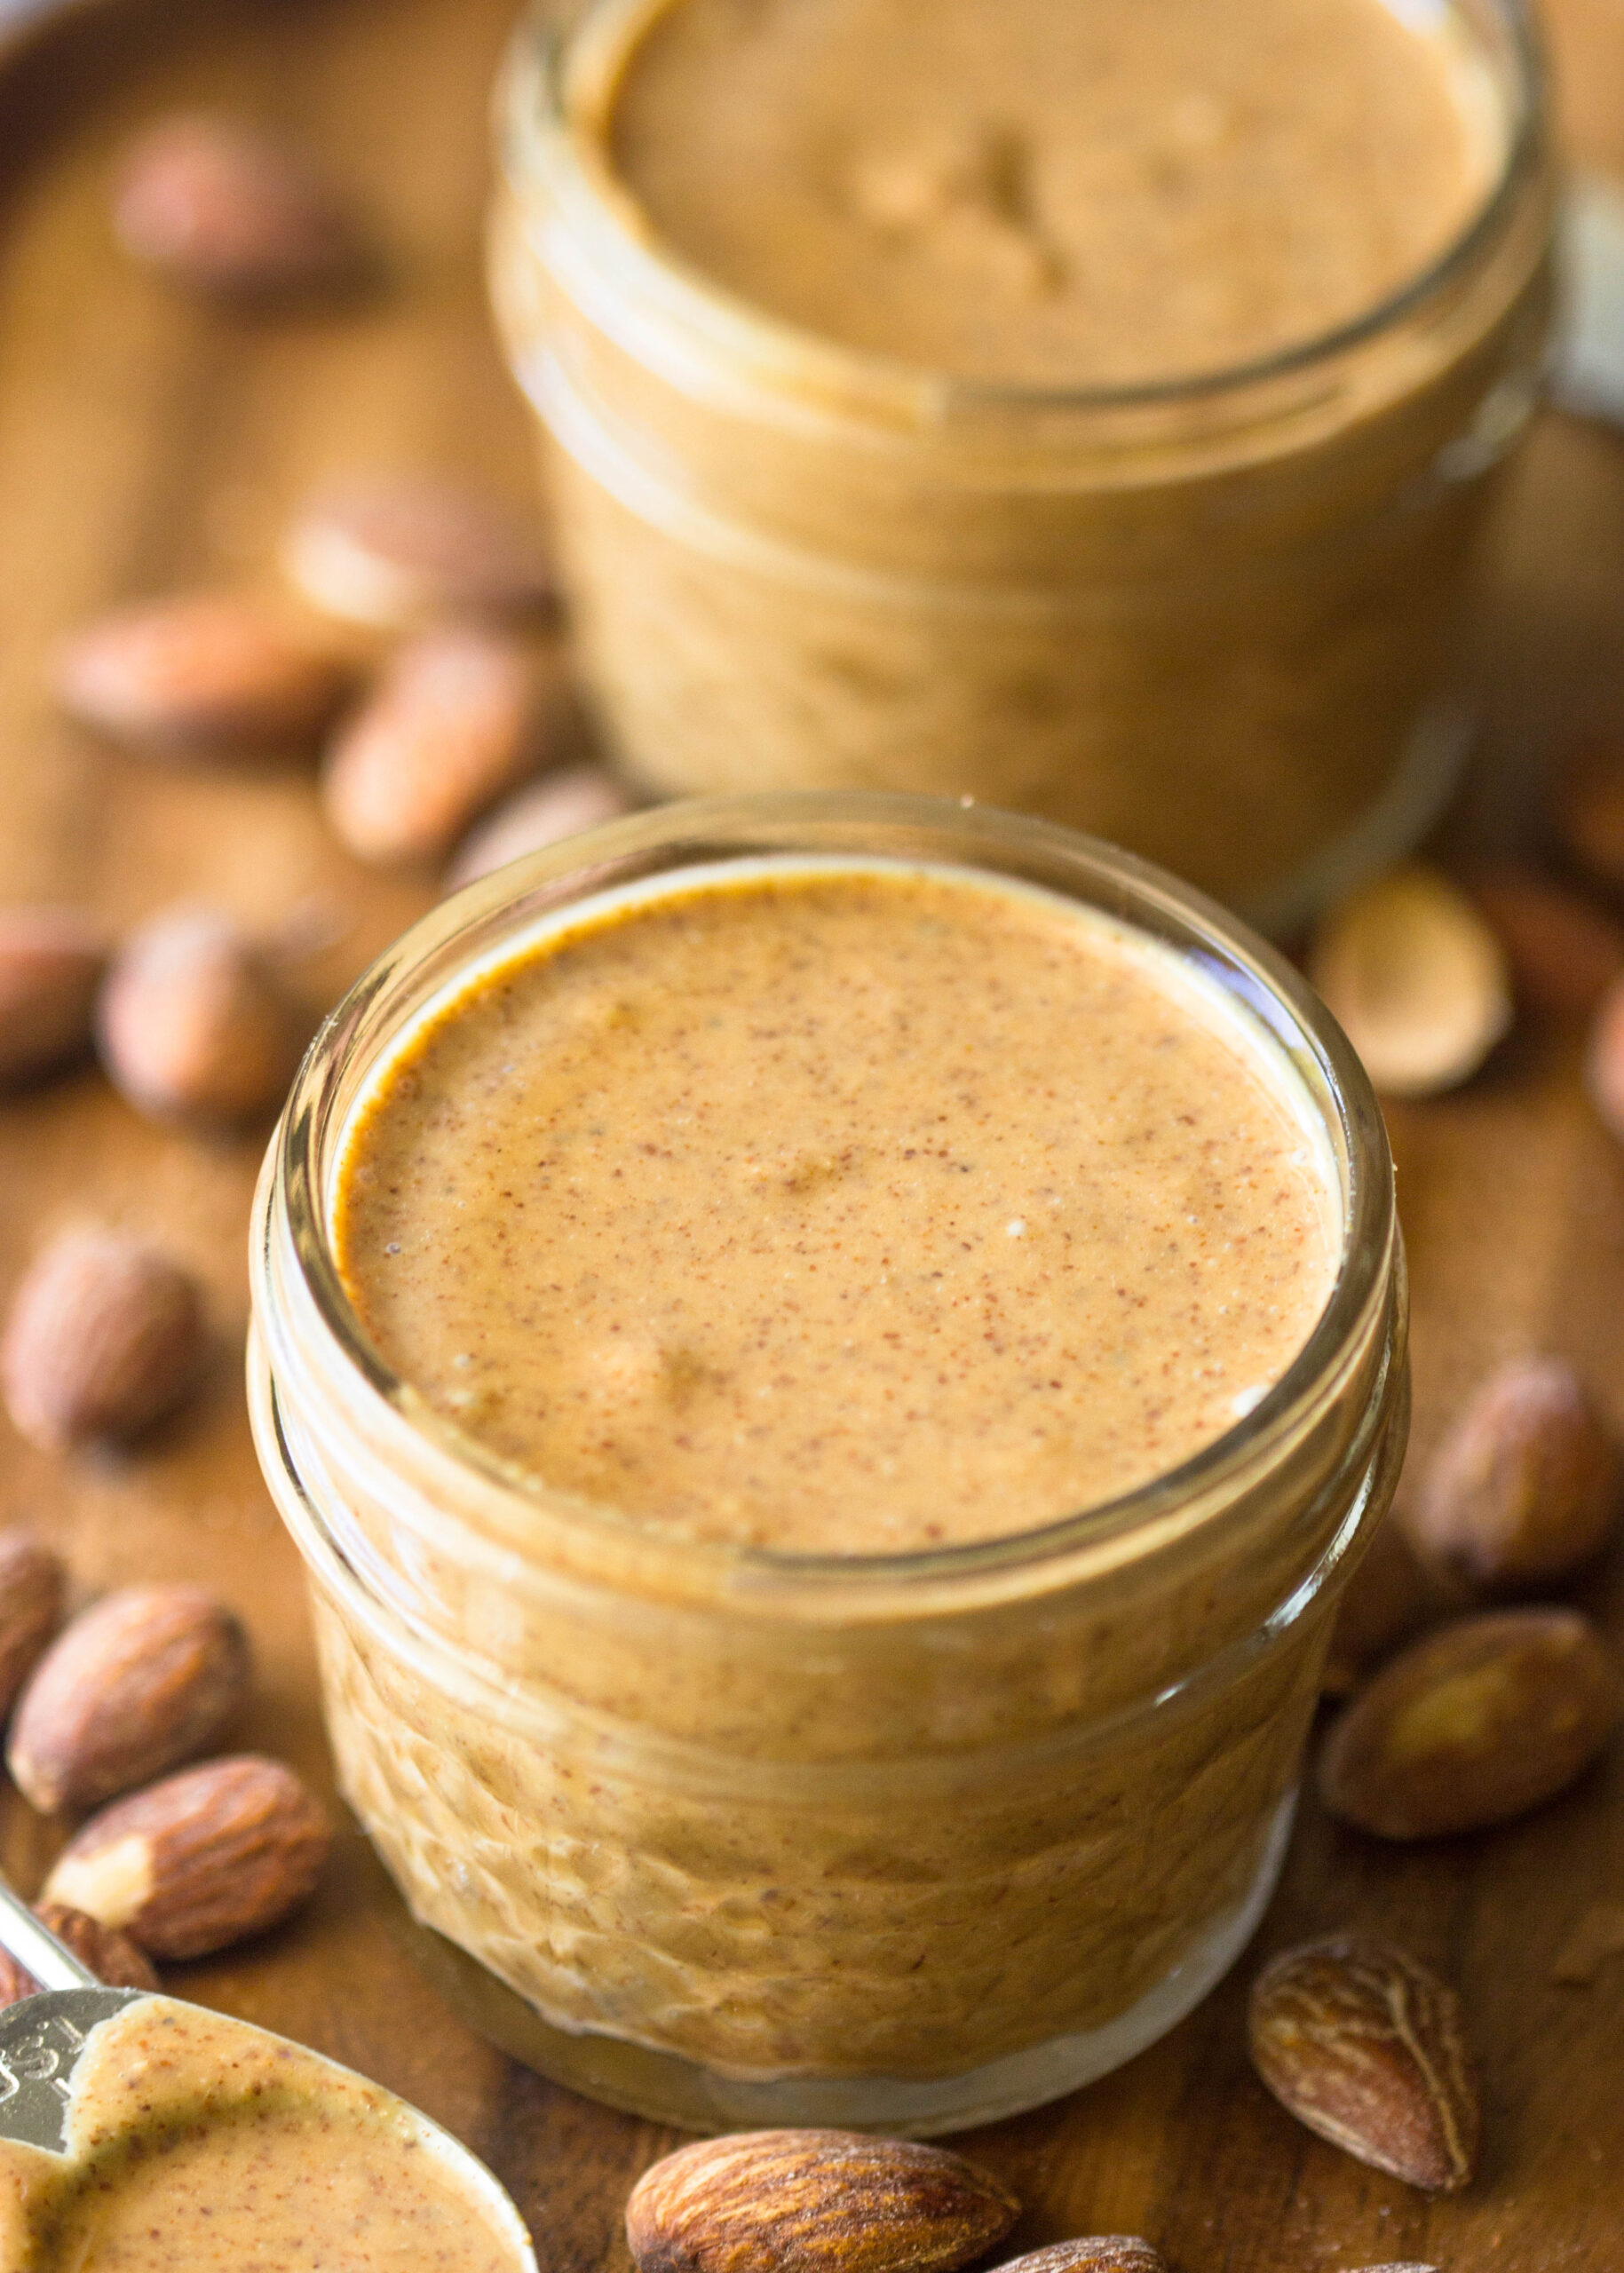 Almond Butter: Cheaper, Easy to Make at Home